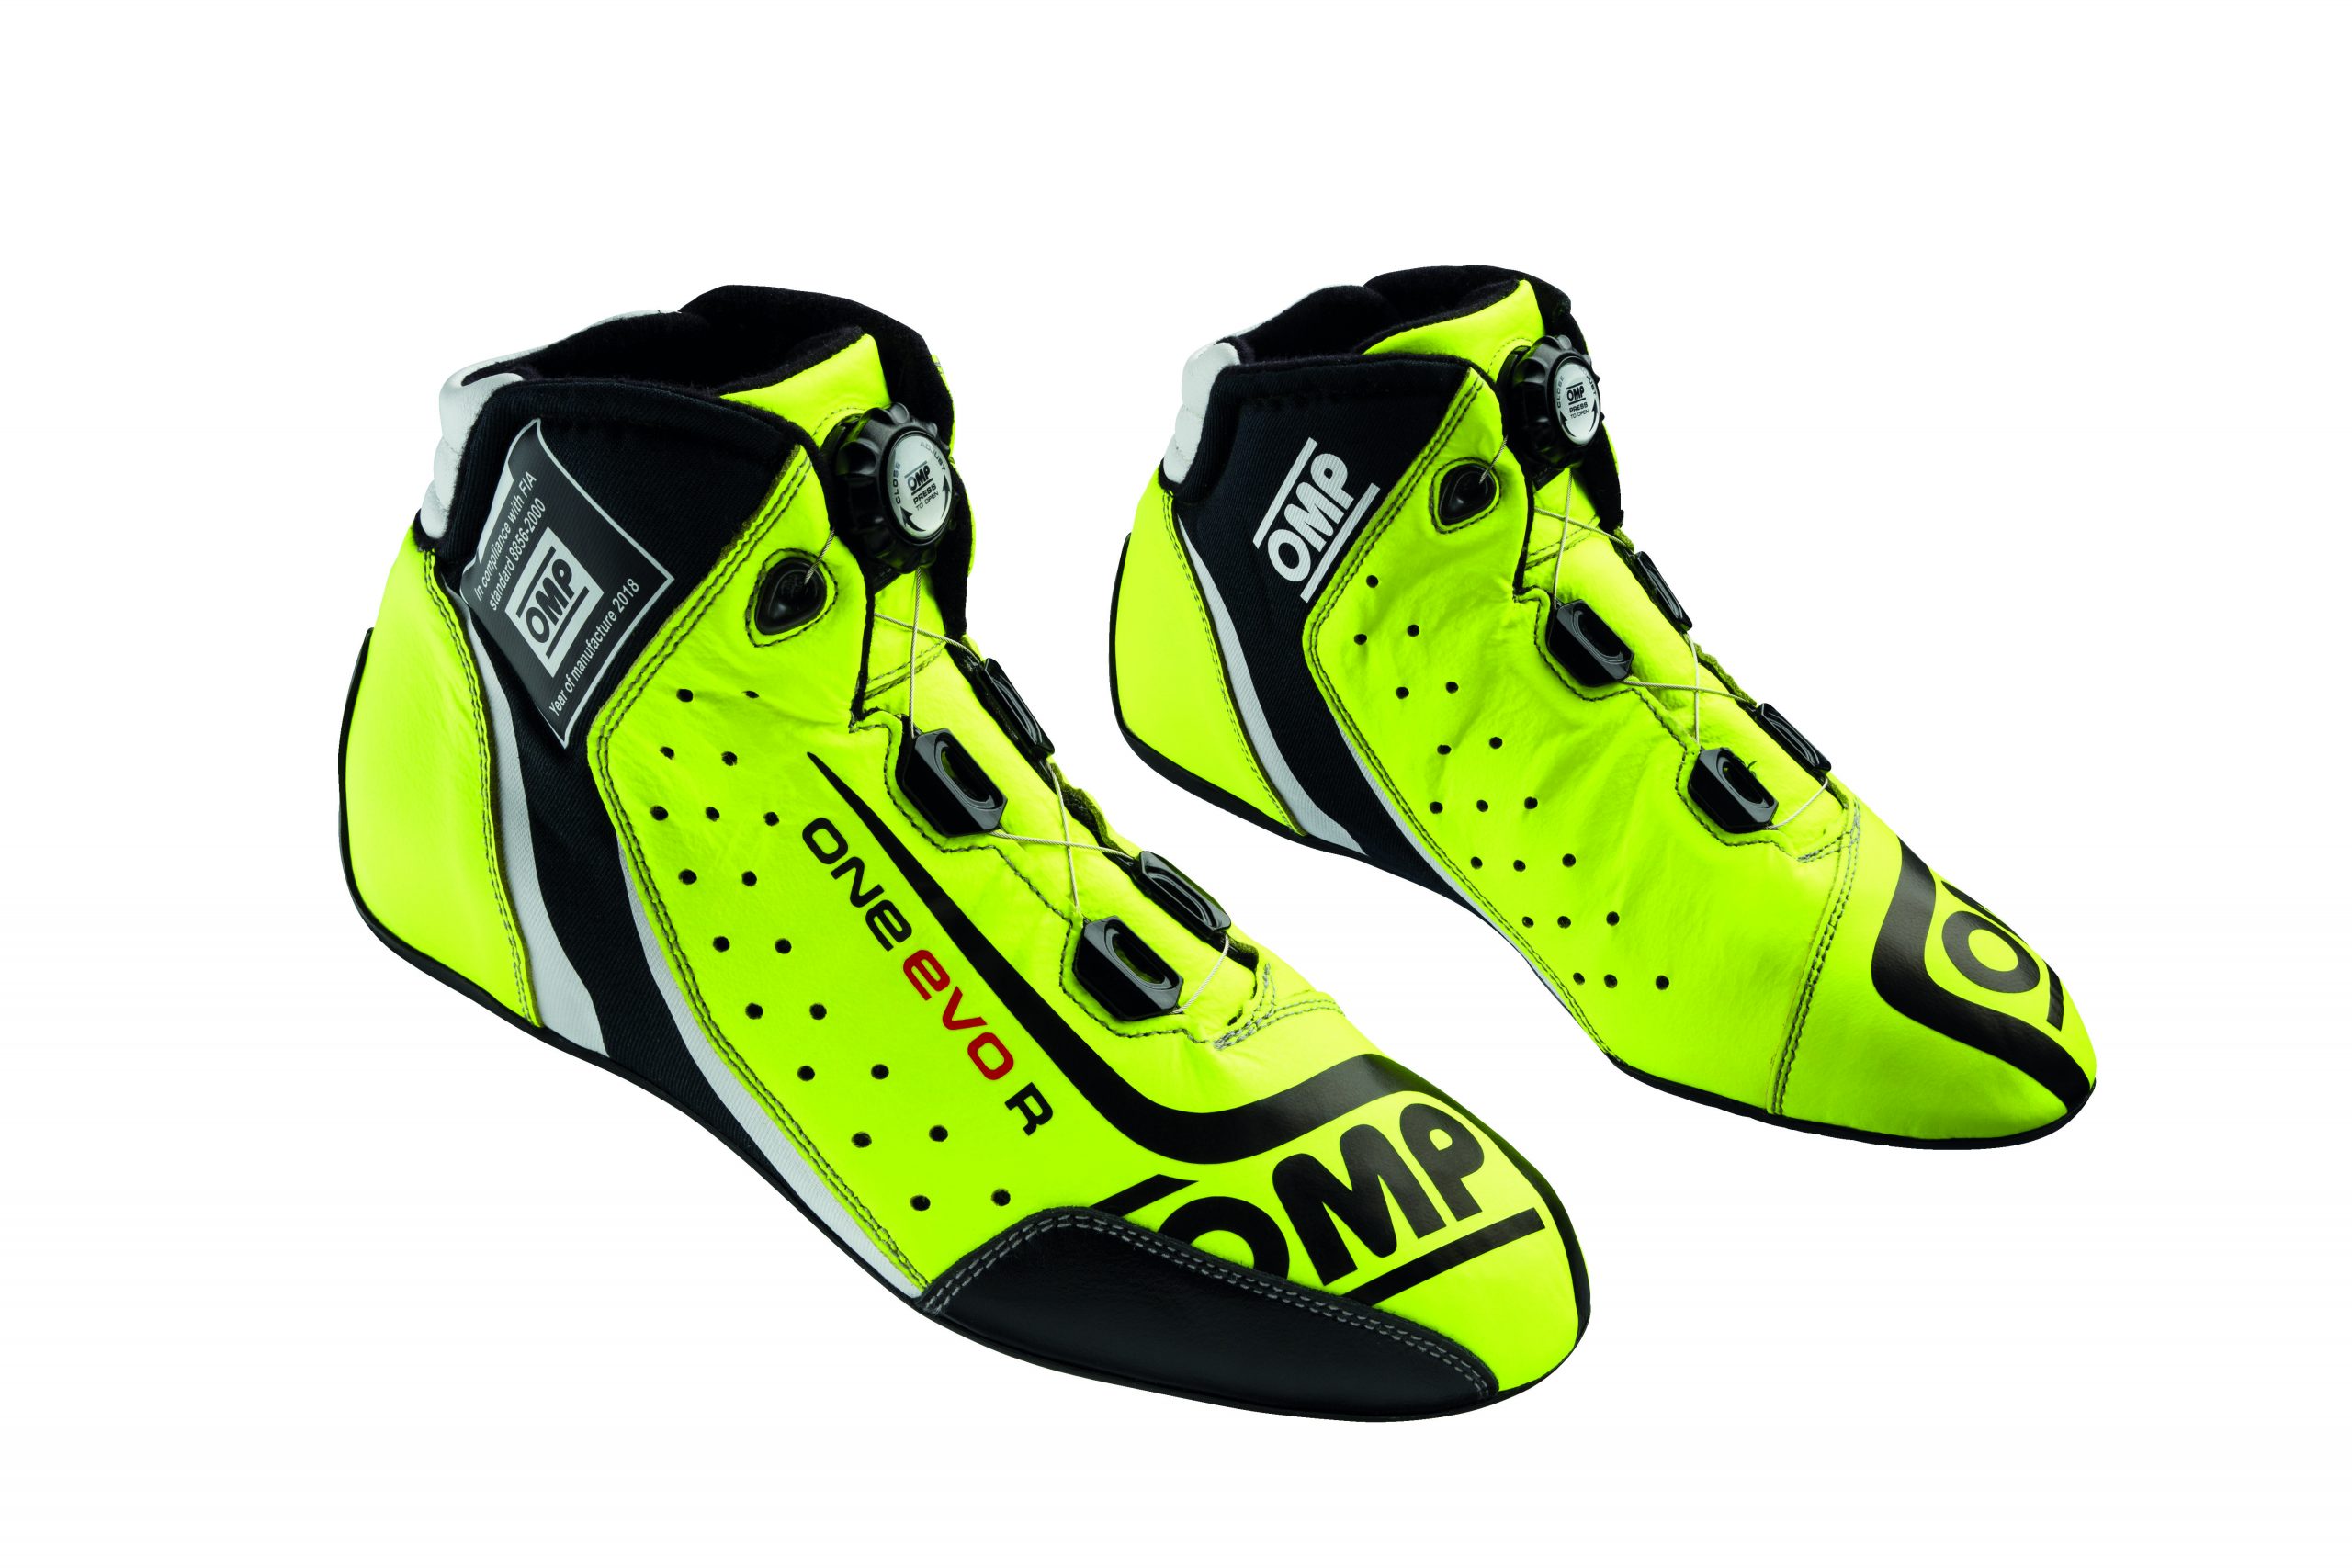 STR Racing Boots FIA 8856-2000 High Quality Race Show UK Size 2.5-13.5 